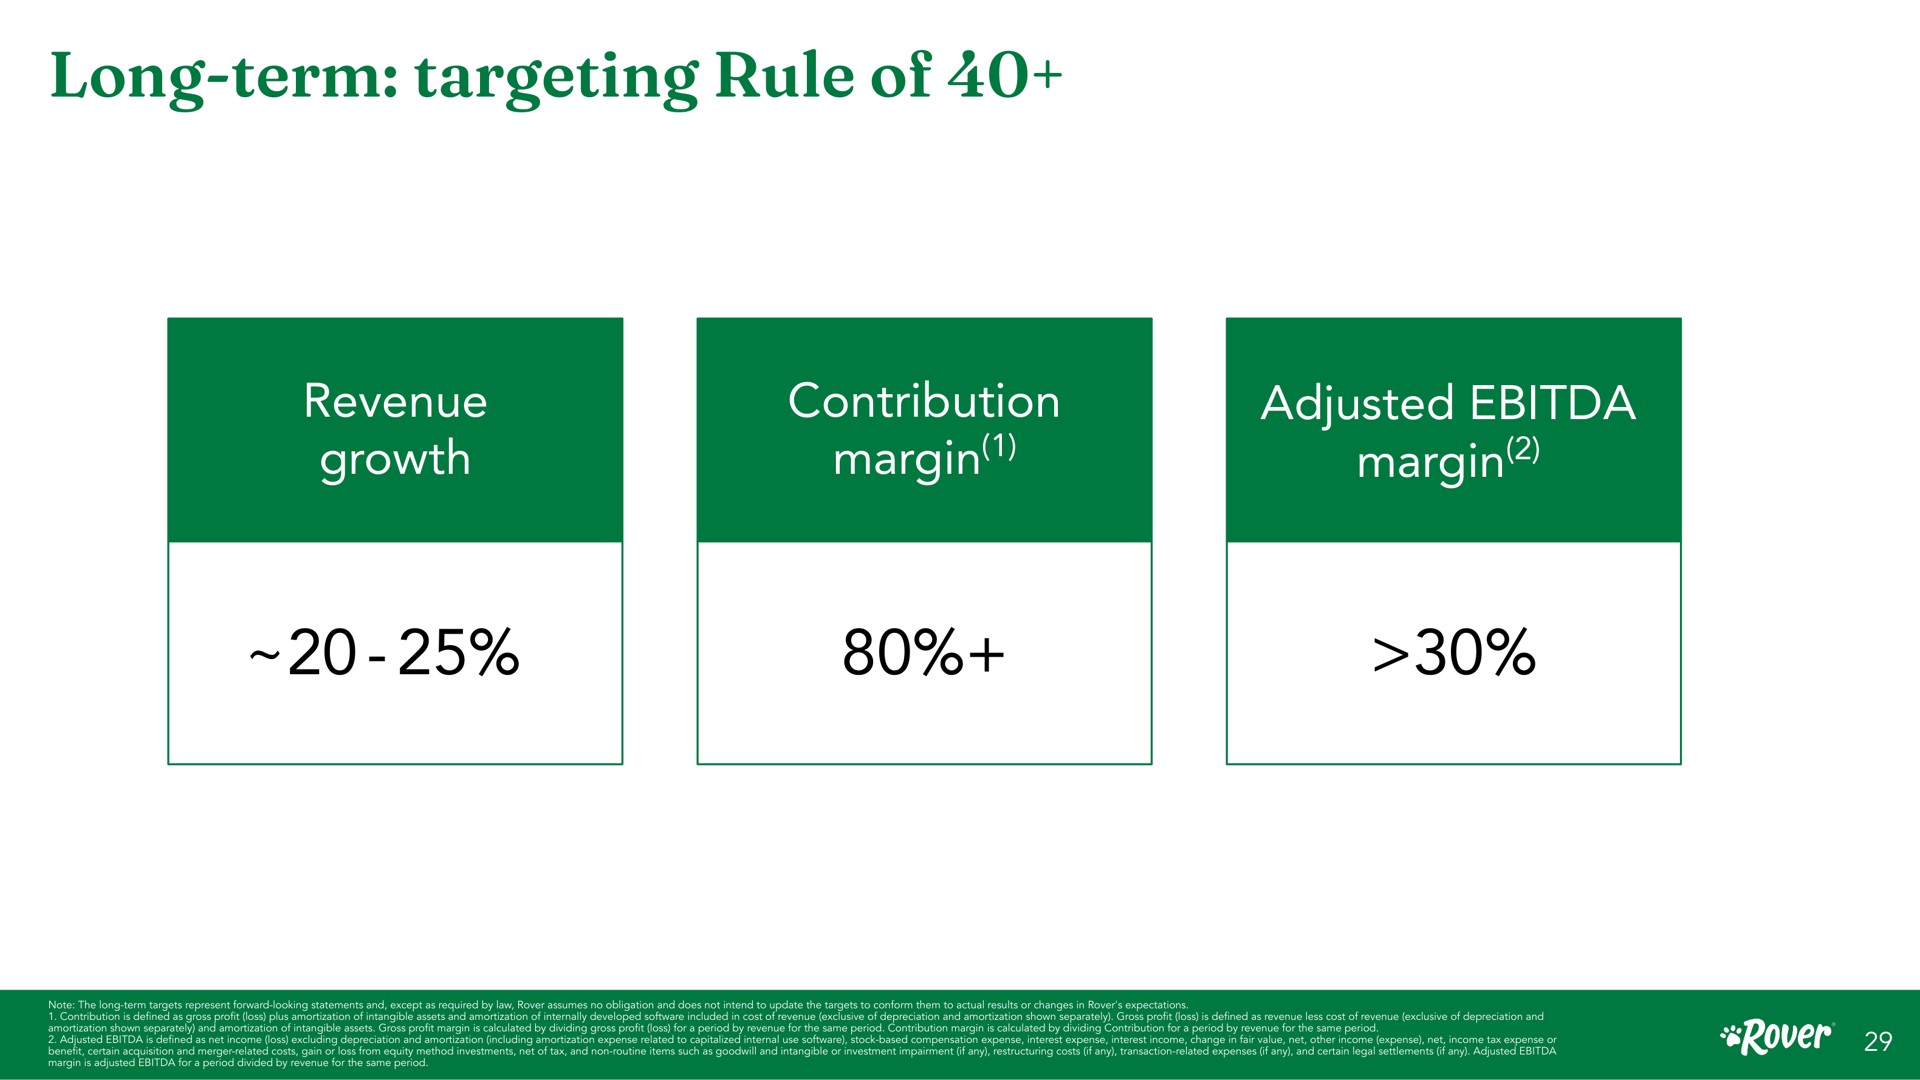 long term targeting rule of revenue growth contribution margin adjusted margin term is for a period divided by for the same period nema a as motes teeters ere a caked is defined end panels loft toe impairment if any costs if any transaction related expenses if any and certain legal settlements if any cal cur ess earn exclusive depreciation and amortization shown separately gross nae tee a tui as gross profit loss plus amortization intangible assets and amortization internally developed included in cost profit loss is defined as less cost exclusive depreciation and chee eke unmade hell eas mae ase equity method investments net tax and non routine items such as goodwill and intangible or in eaters to gain or loss from related costs | Rover